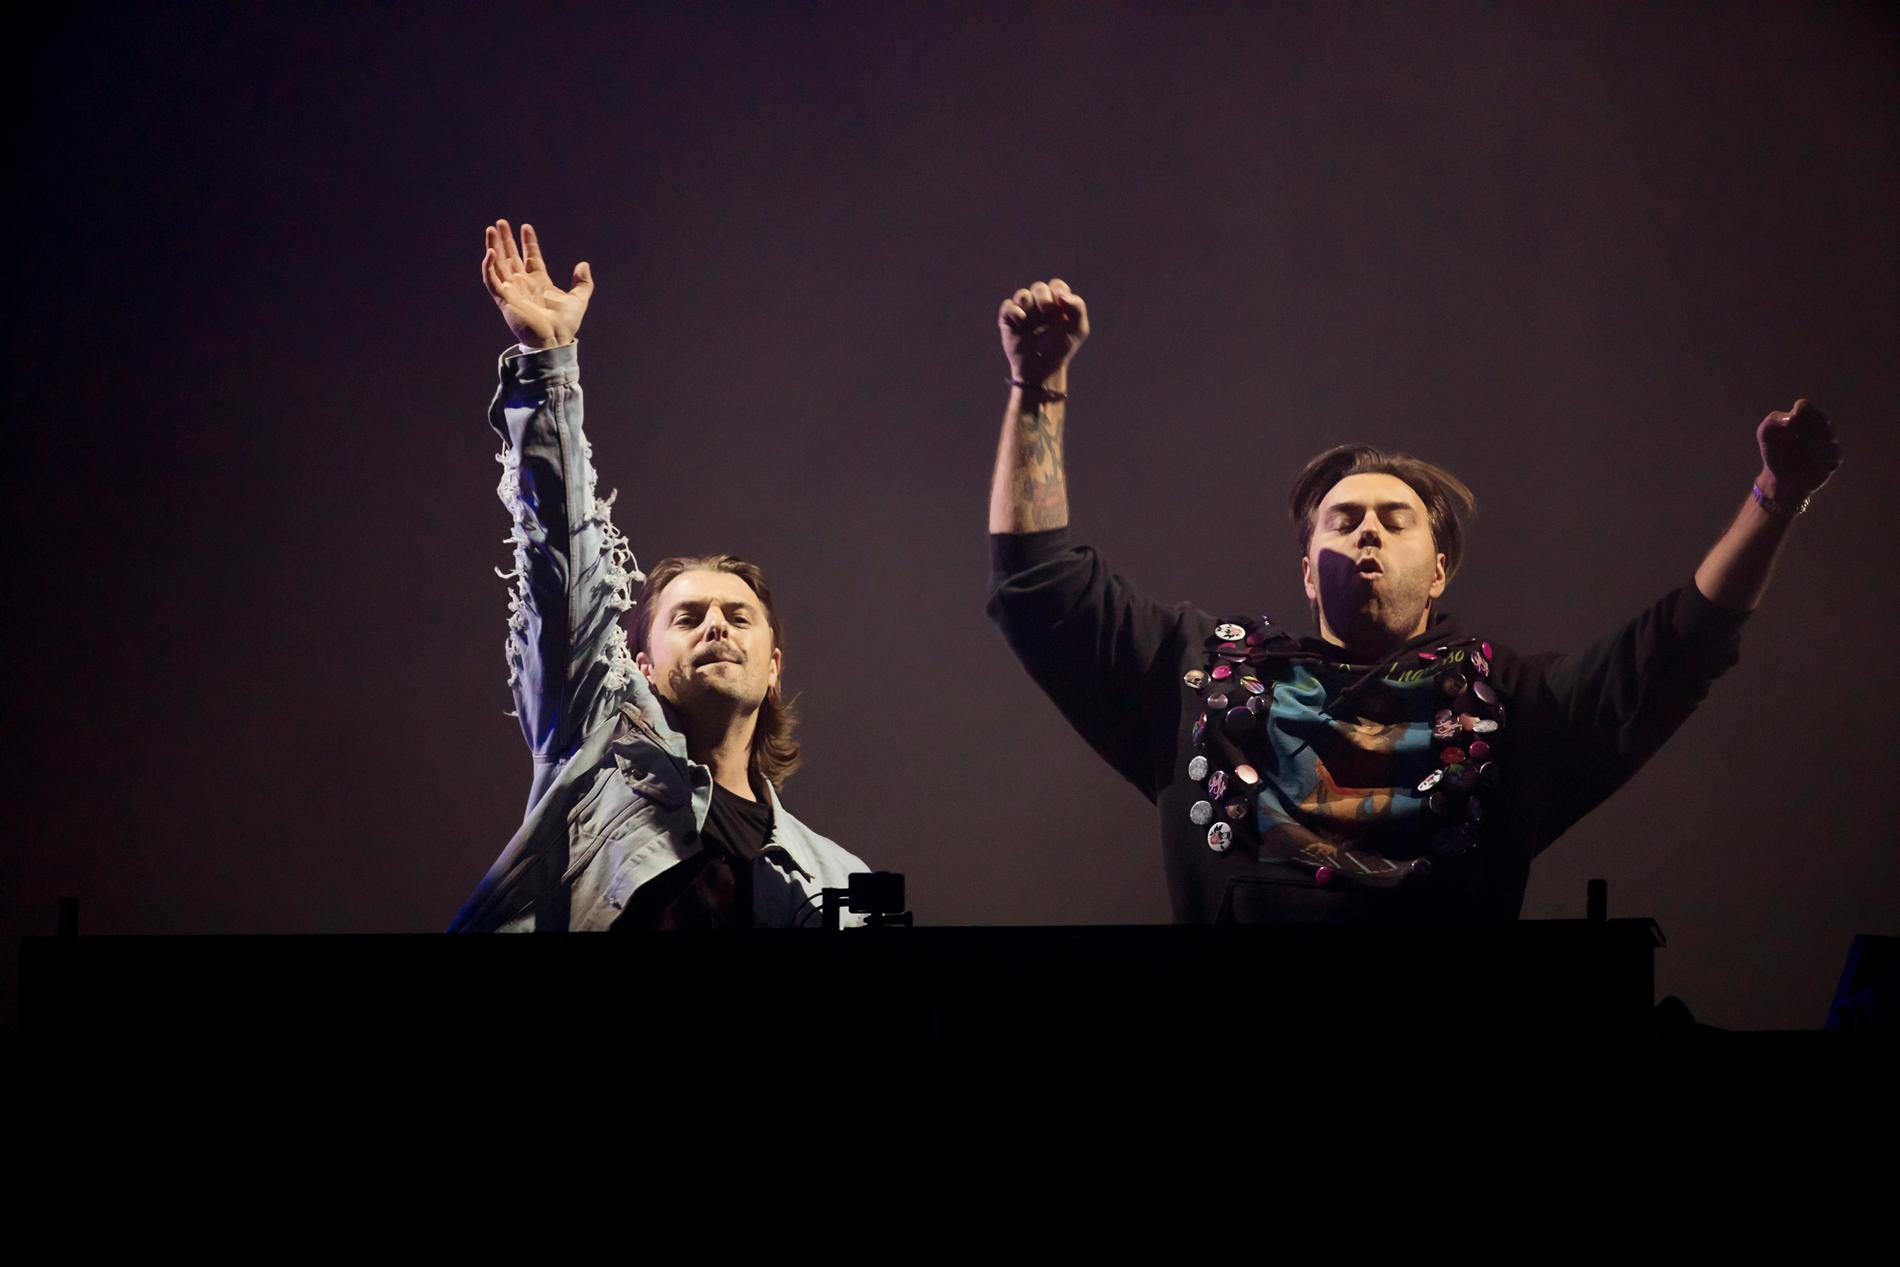 Axell & Ingrosso